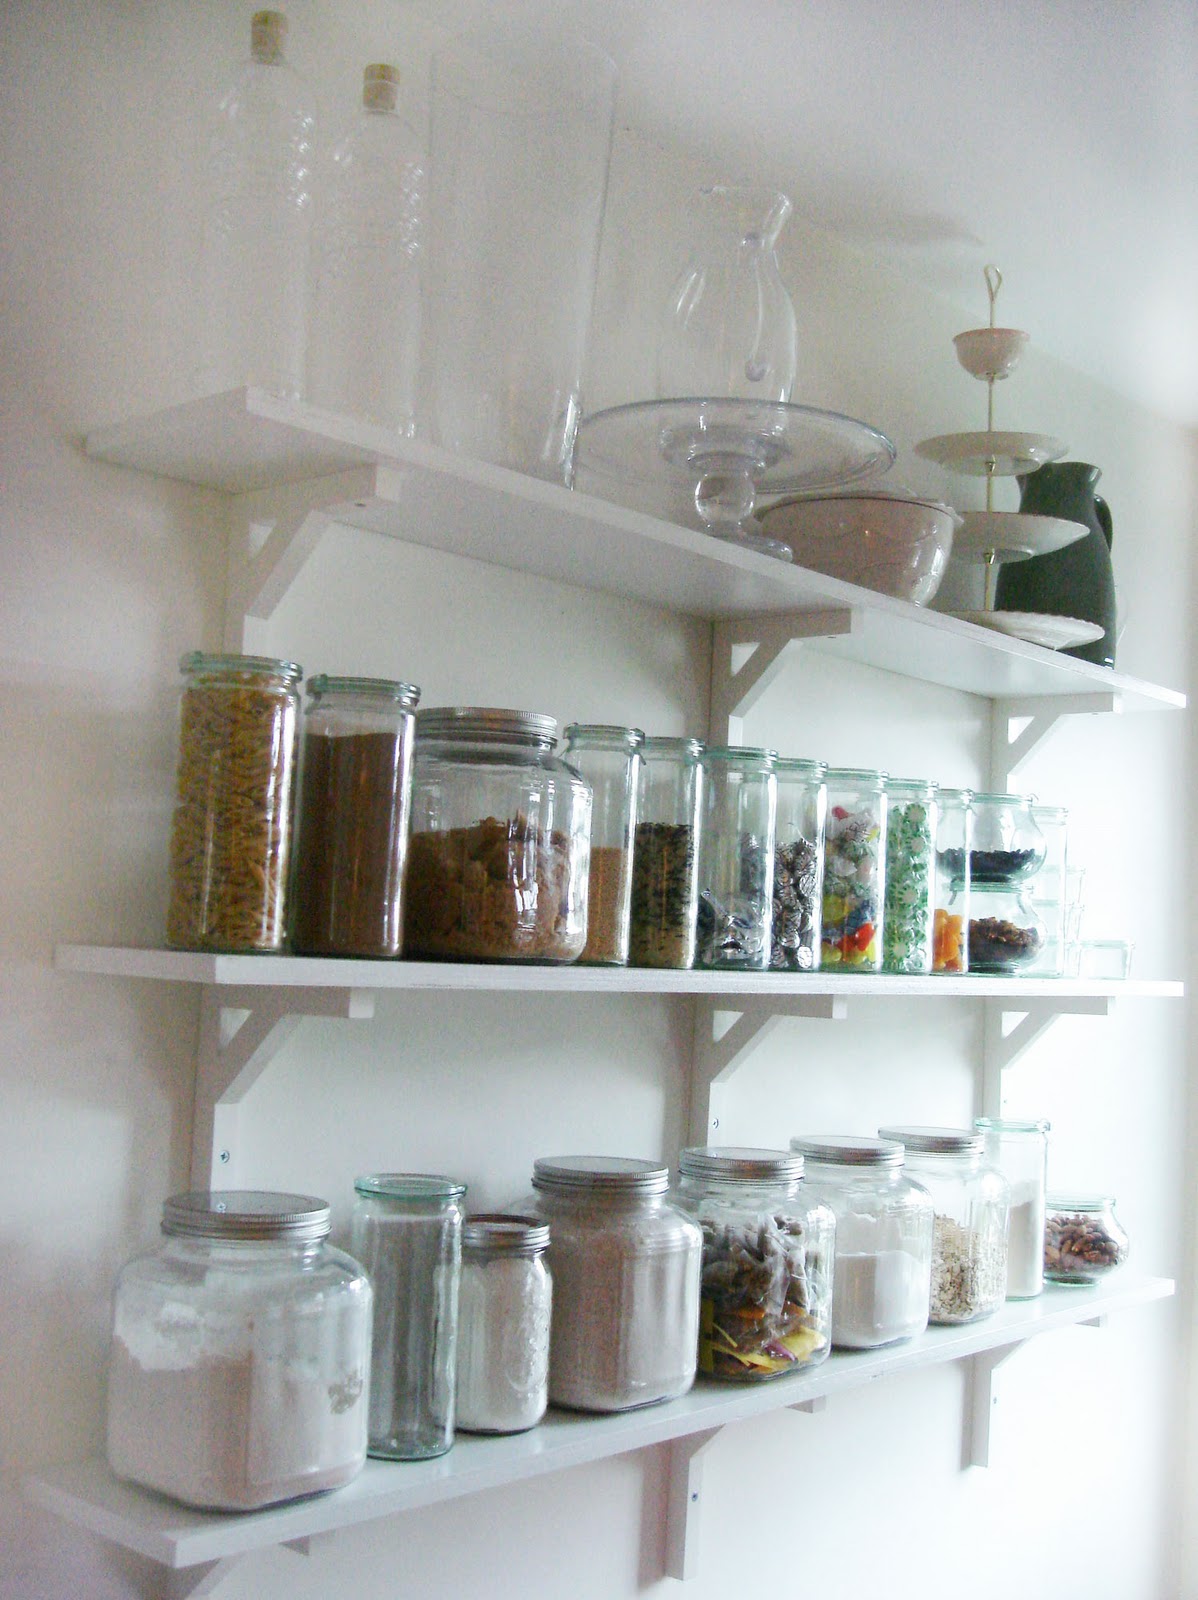 Kitchen Pantry With White Pitchers On Shelves And Bottles Jars